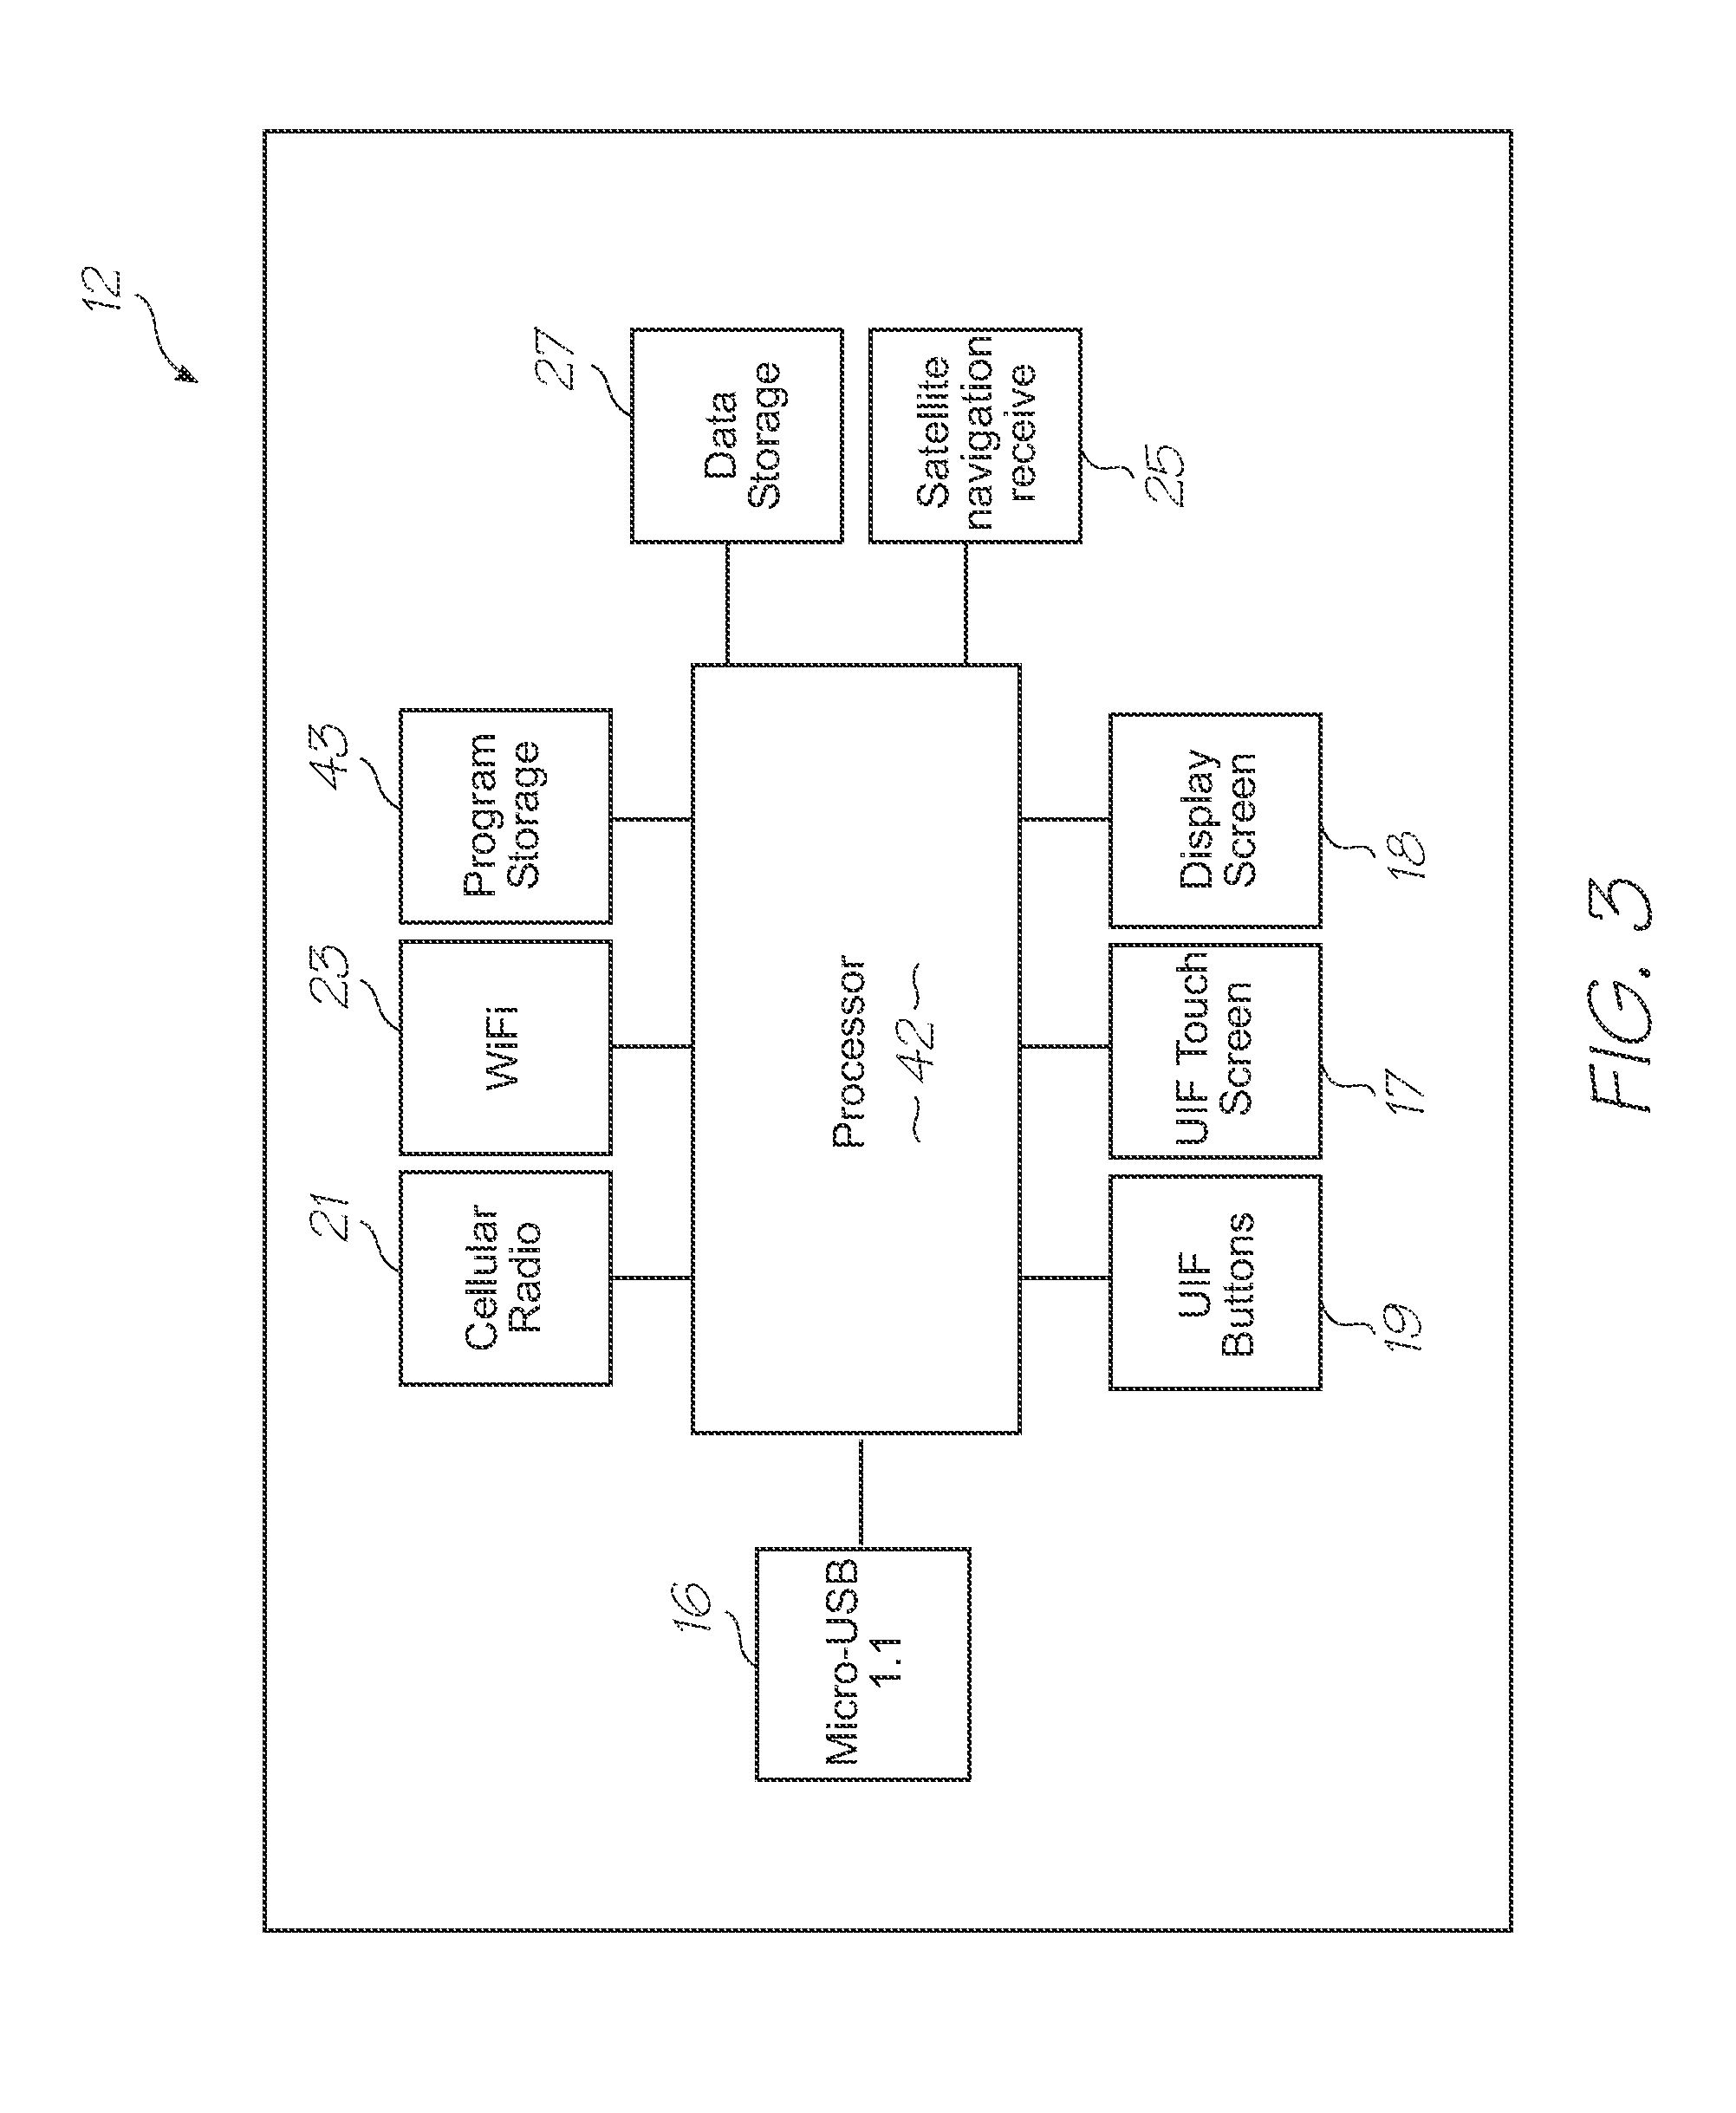 Microfluidic device with flow-channel structure having active valve for capillary-driven fluidic propulsion without trapped air bubbles